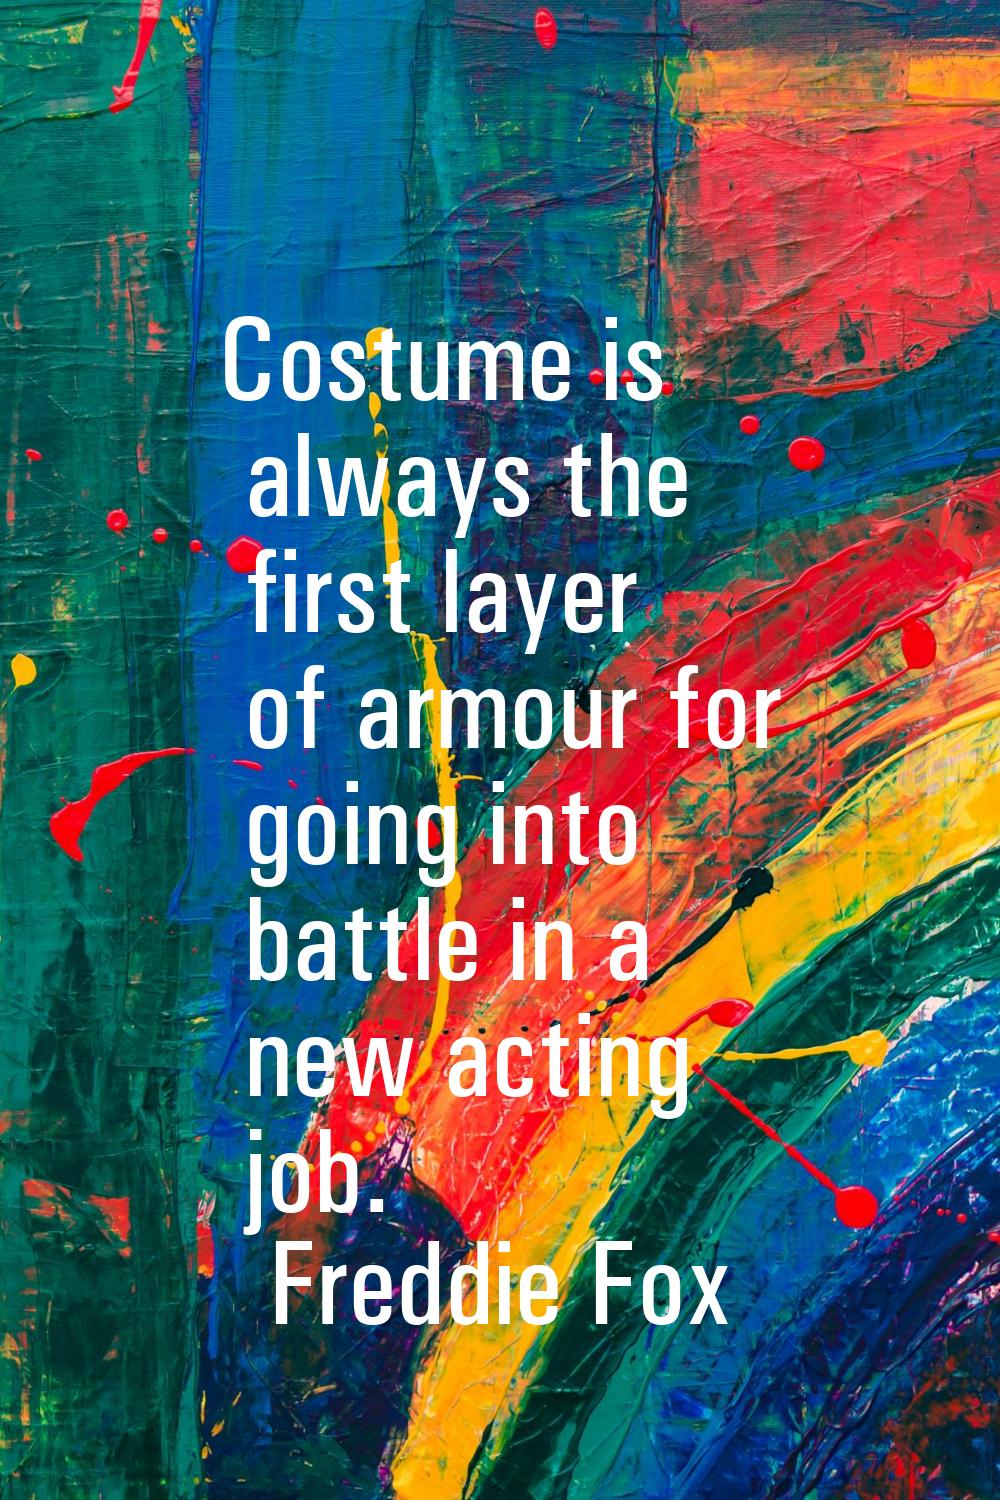 Costume is always the first layer of armour for going into battle in a new acting job.